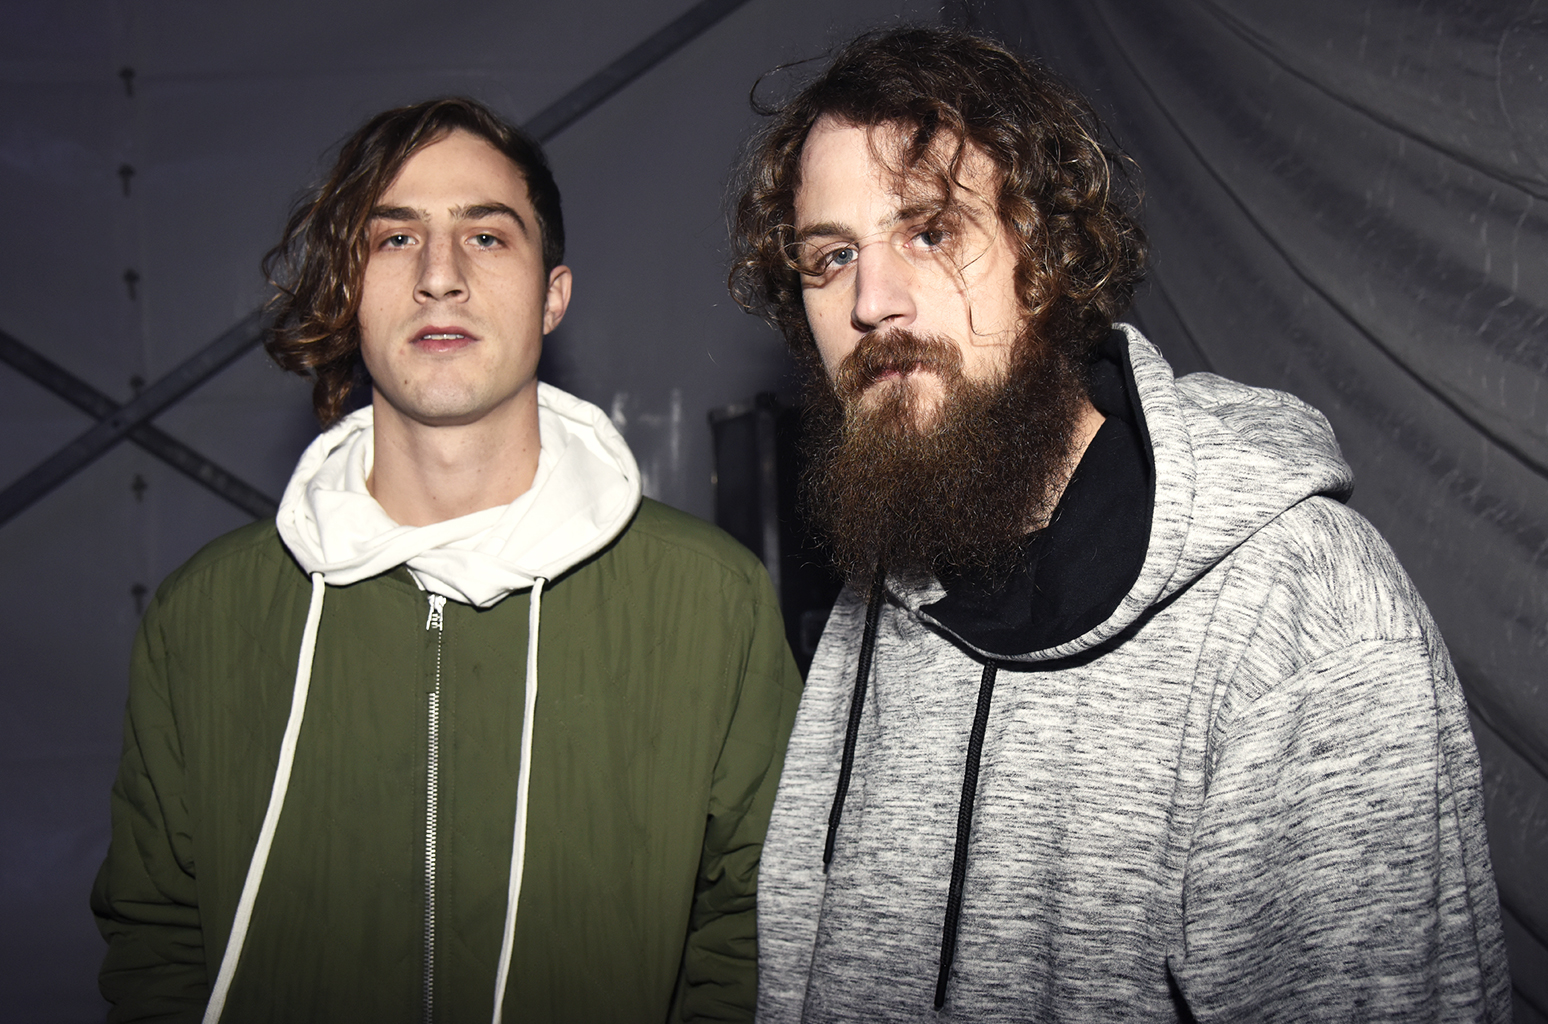 Hippie Sabotage Fights Security at What The Festival, Duo Claims Self